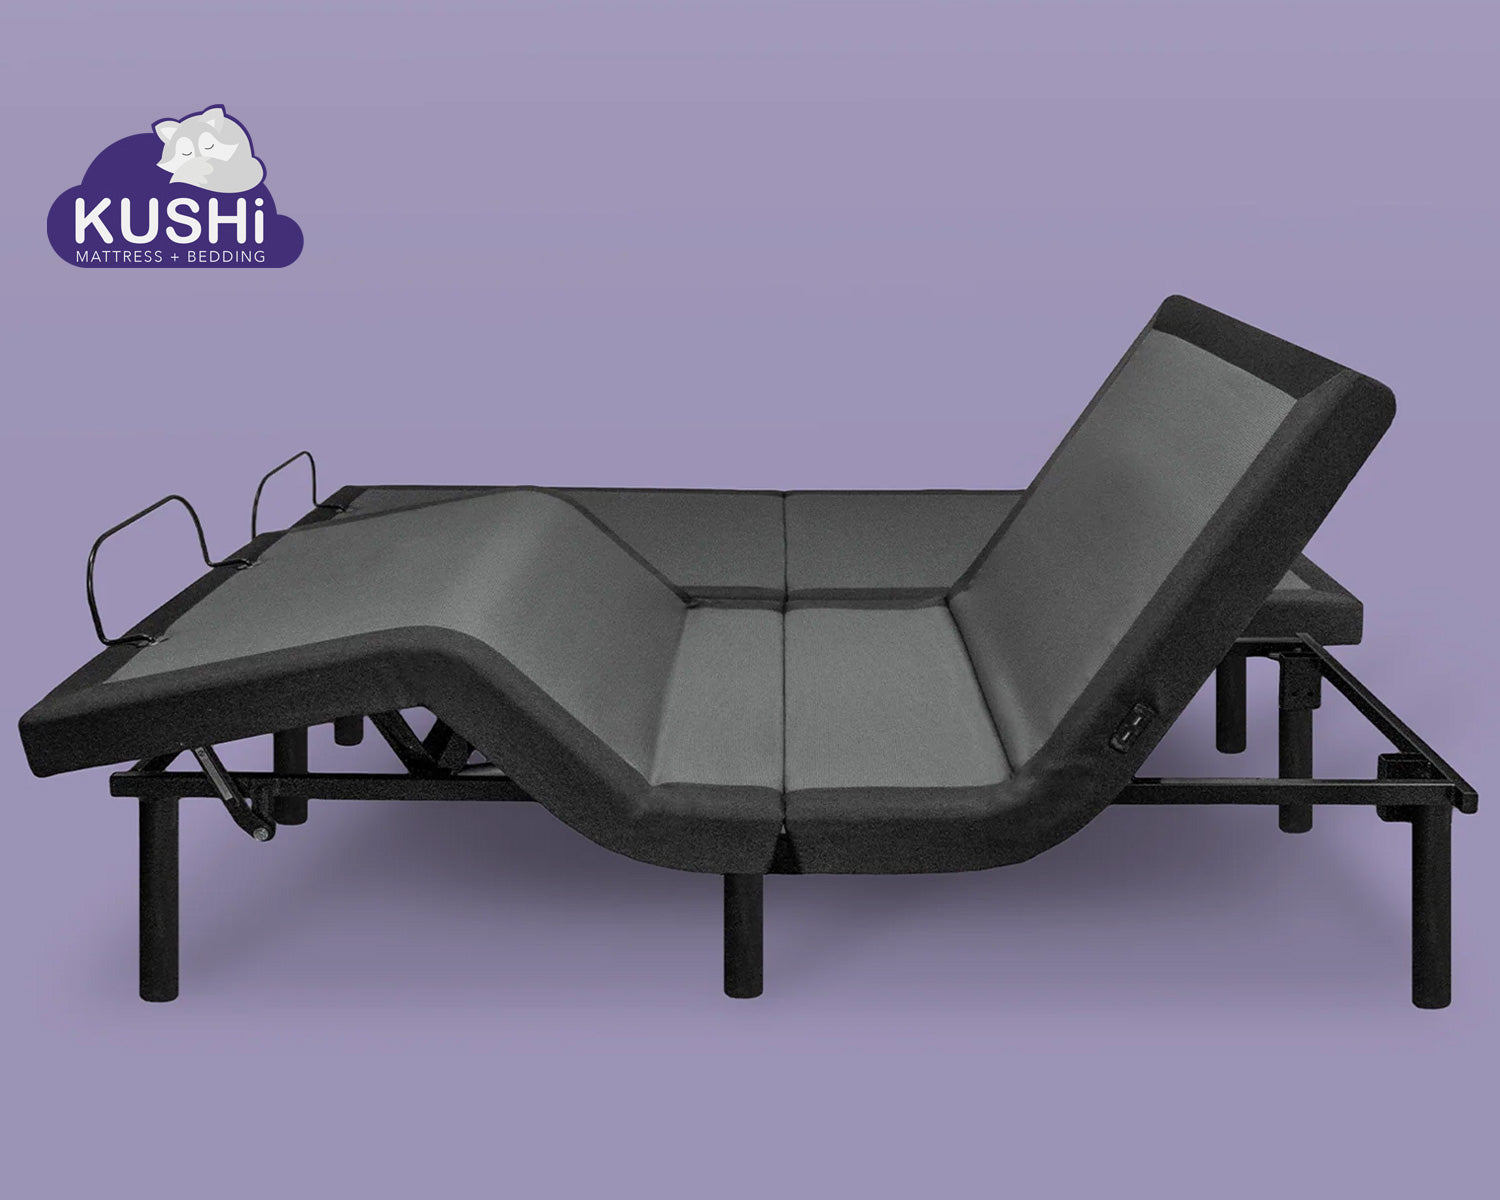 Transform Your Sleep with Adjustable Bed Frames by Kushi Mattress & Bedding